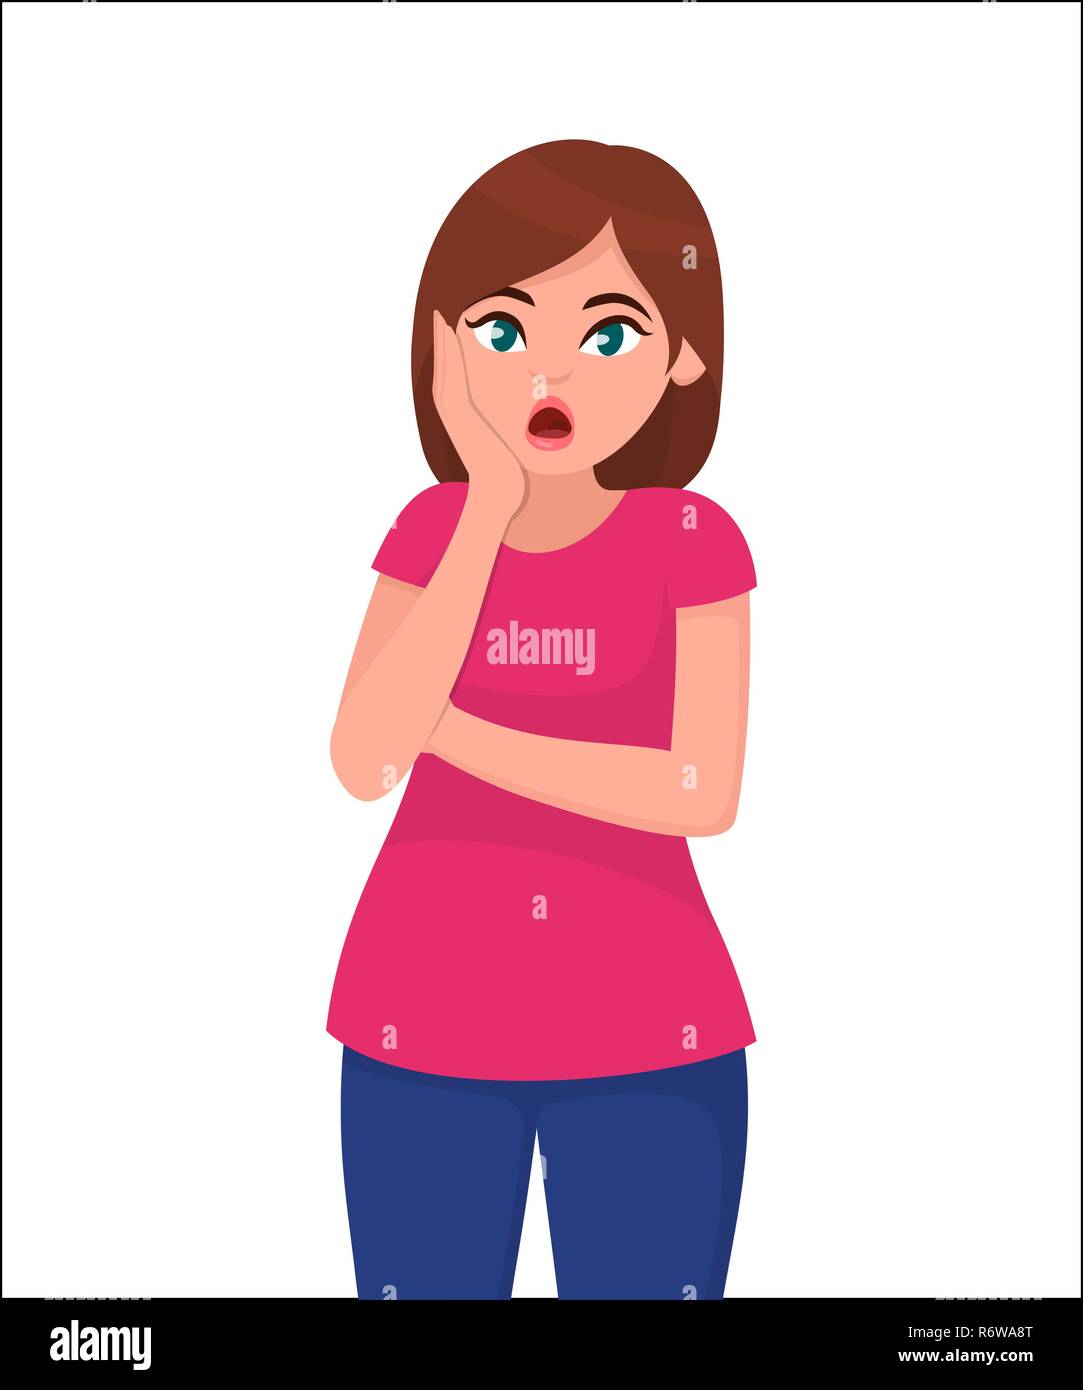 Shocked pretty young woman holding hand on face. Human emotion and body language concept illustration in vector cartoon flat style. Stock Vector